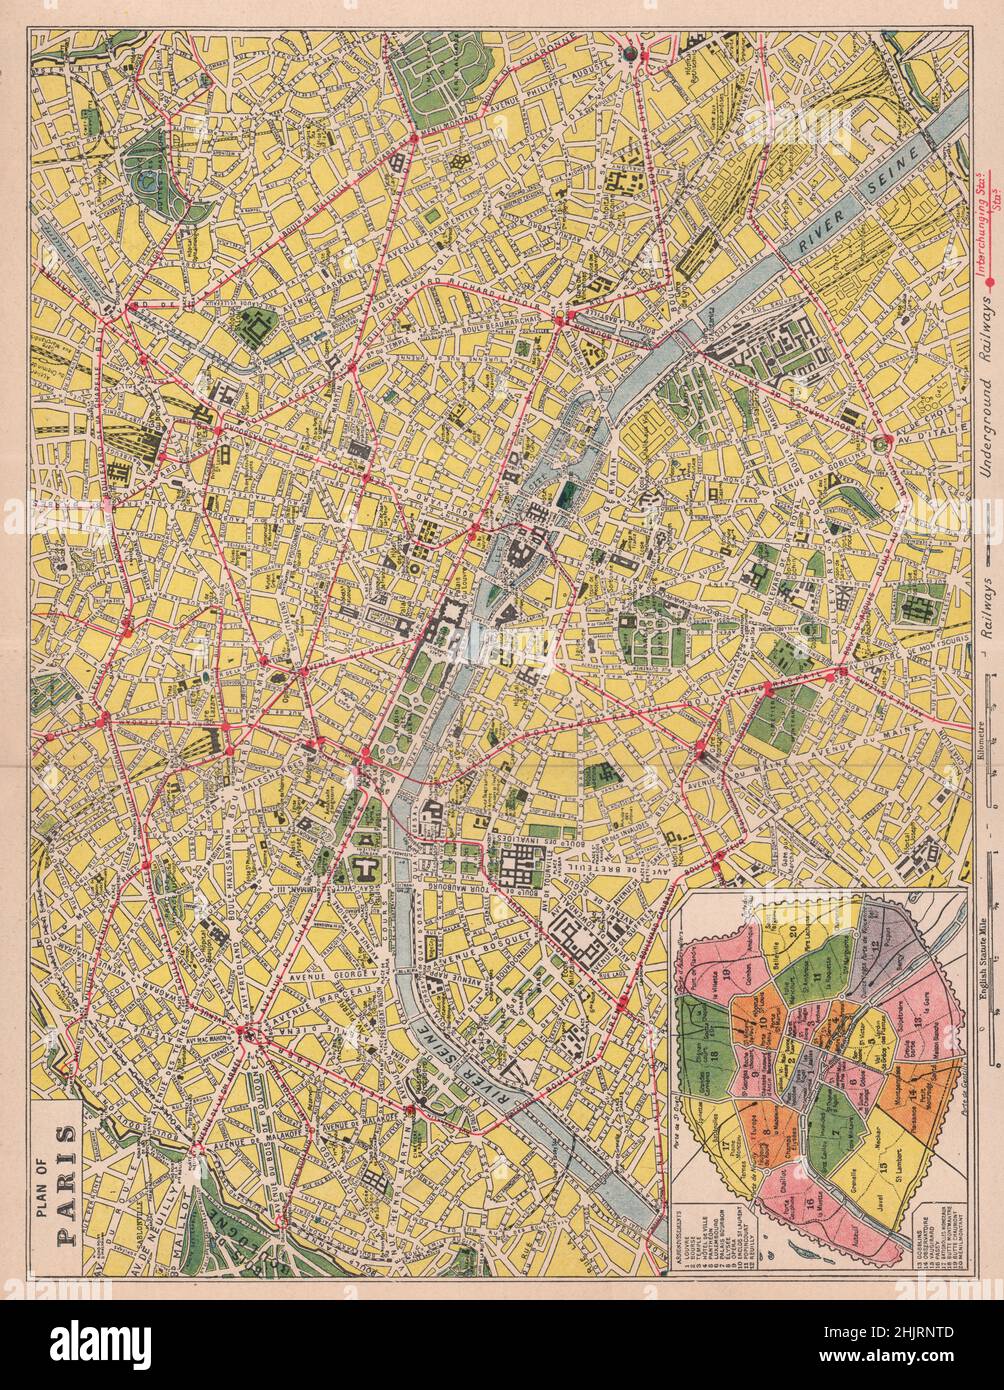 Central district of the ' City of Light. ' With its streets and railways and a plan of the arrondissements. Paris  (1923 map) Stock Photo